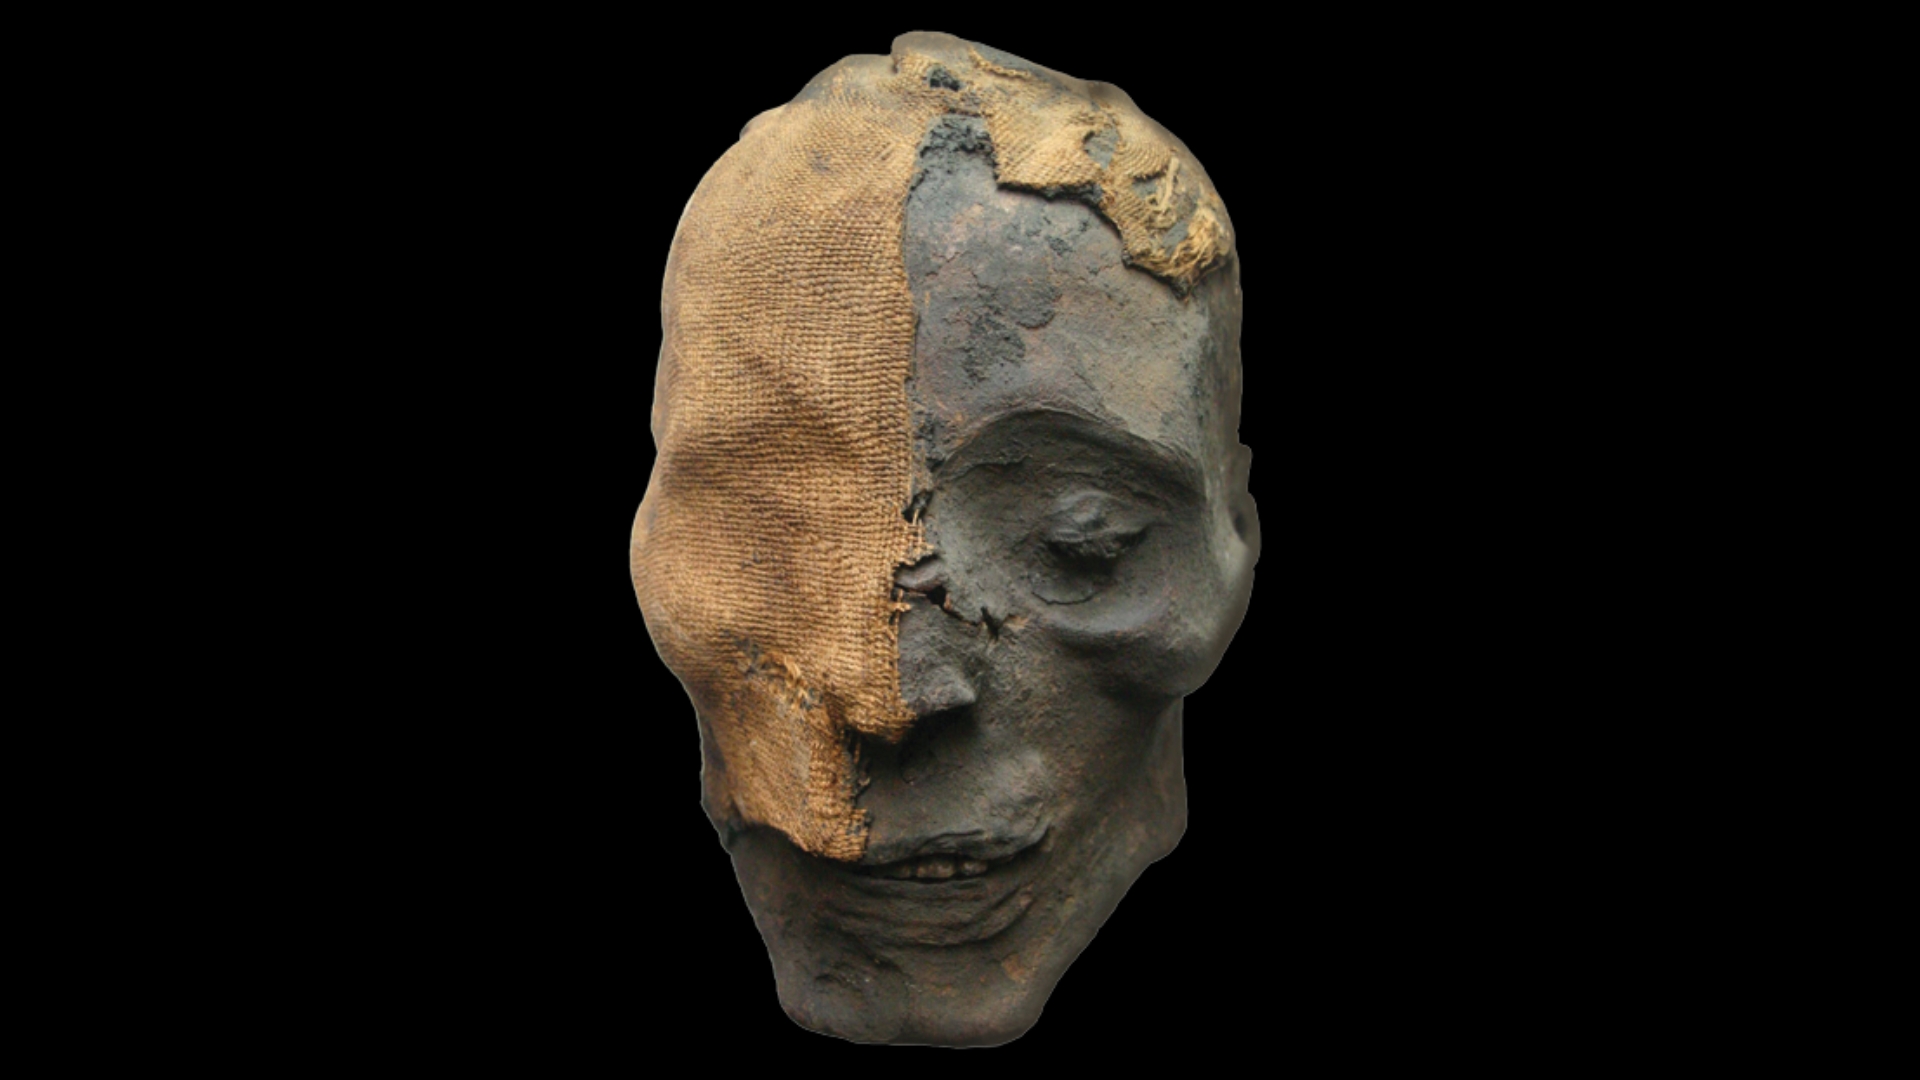 Image of mummy skull from Mummies of the World: Exhibition featured at the Discovery Center of Idaho.